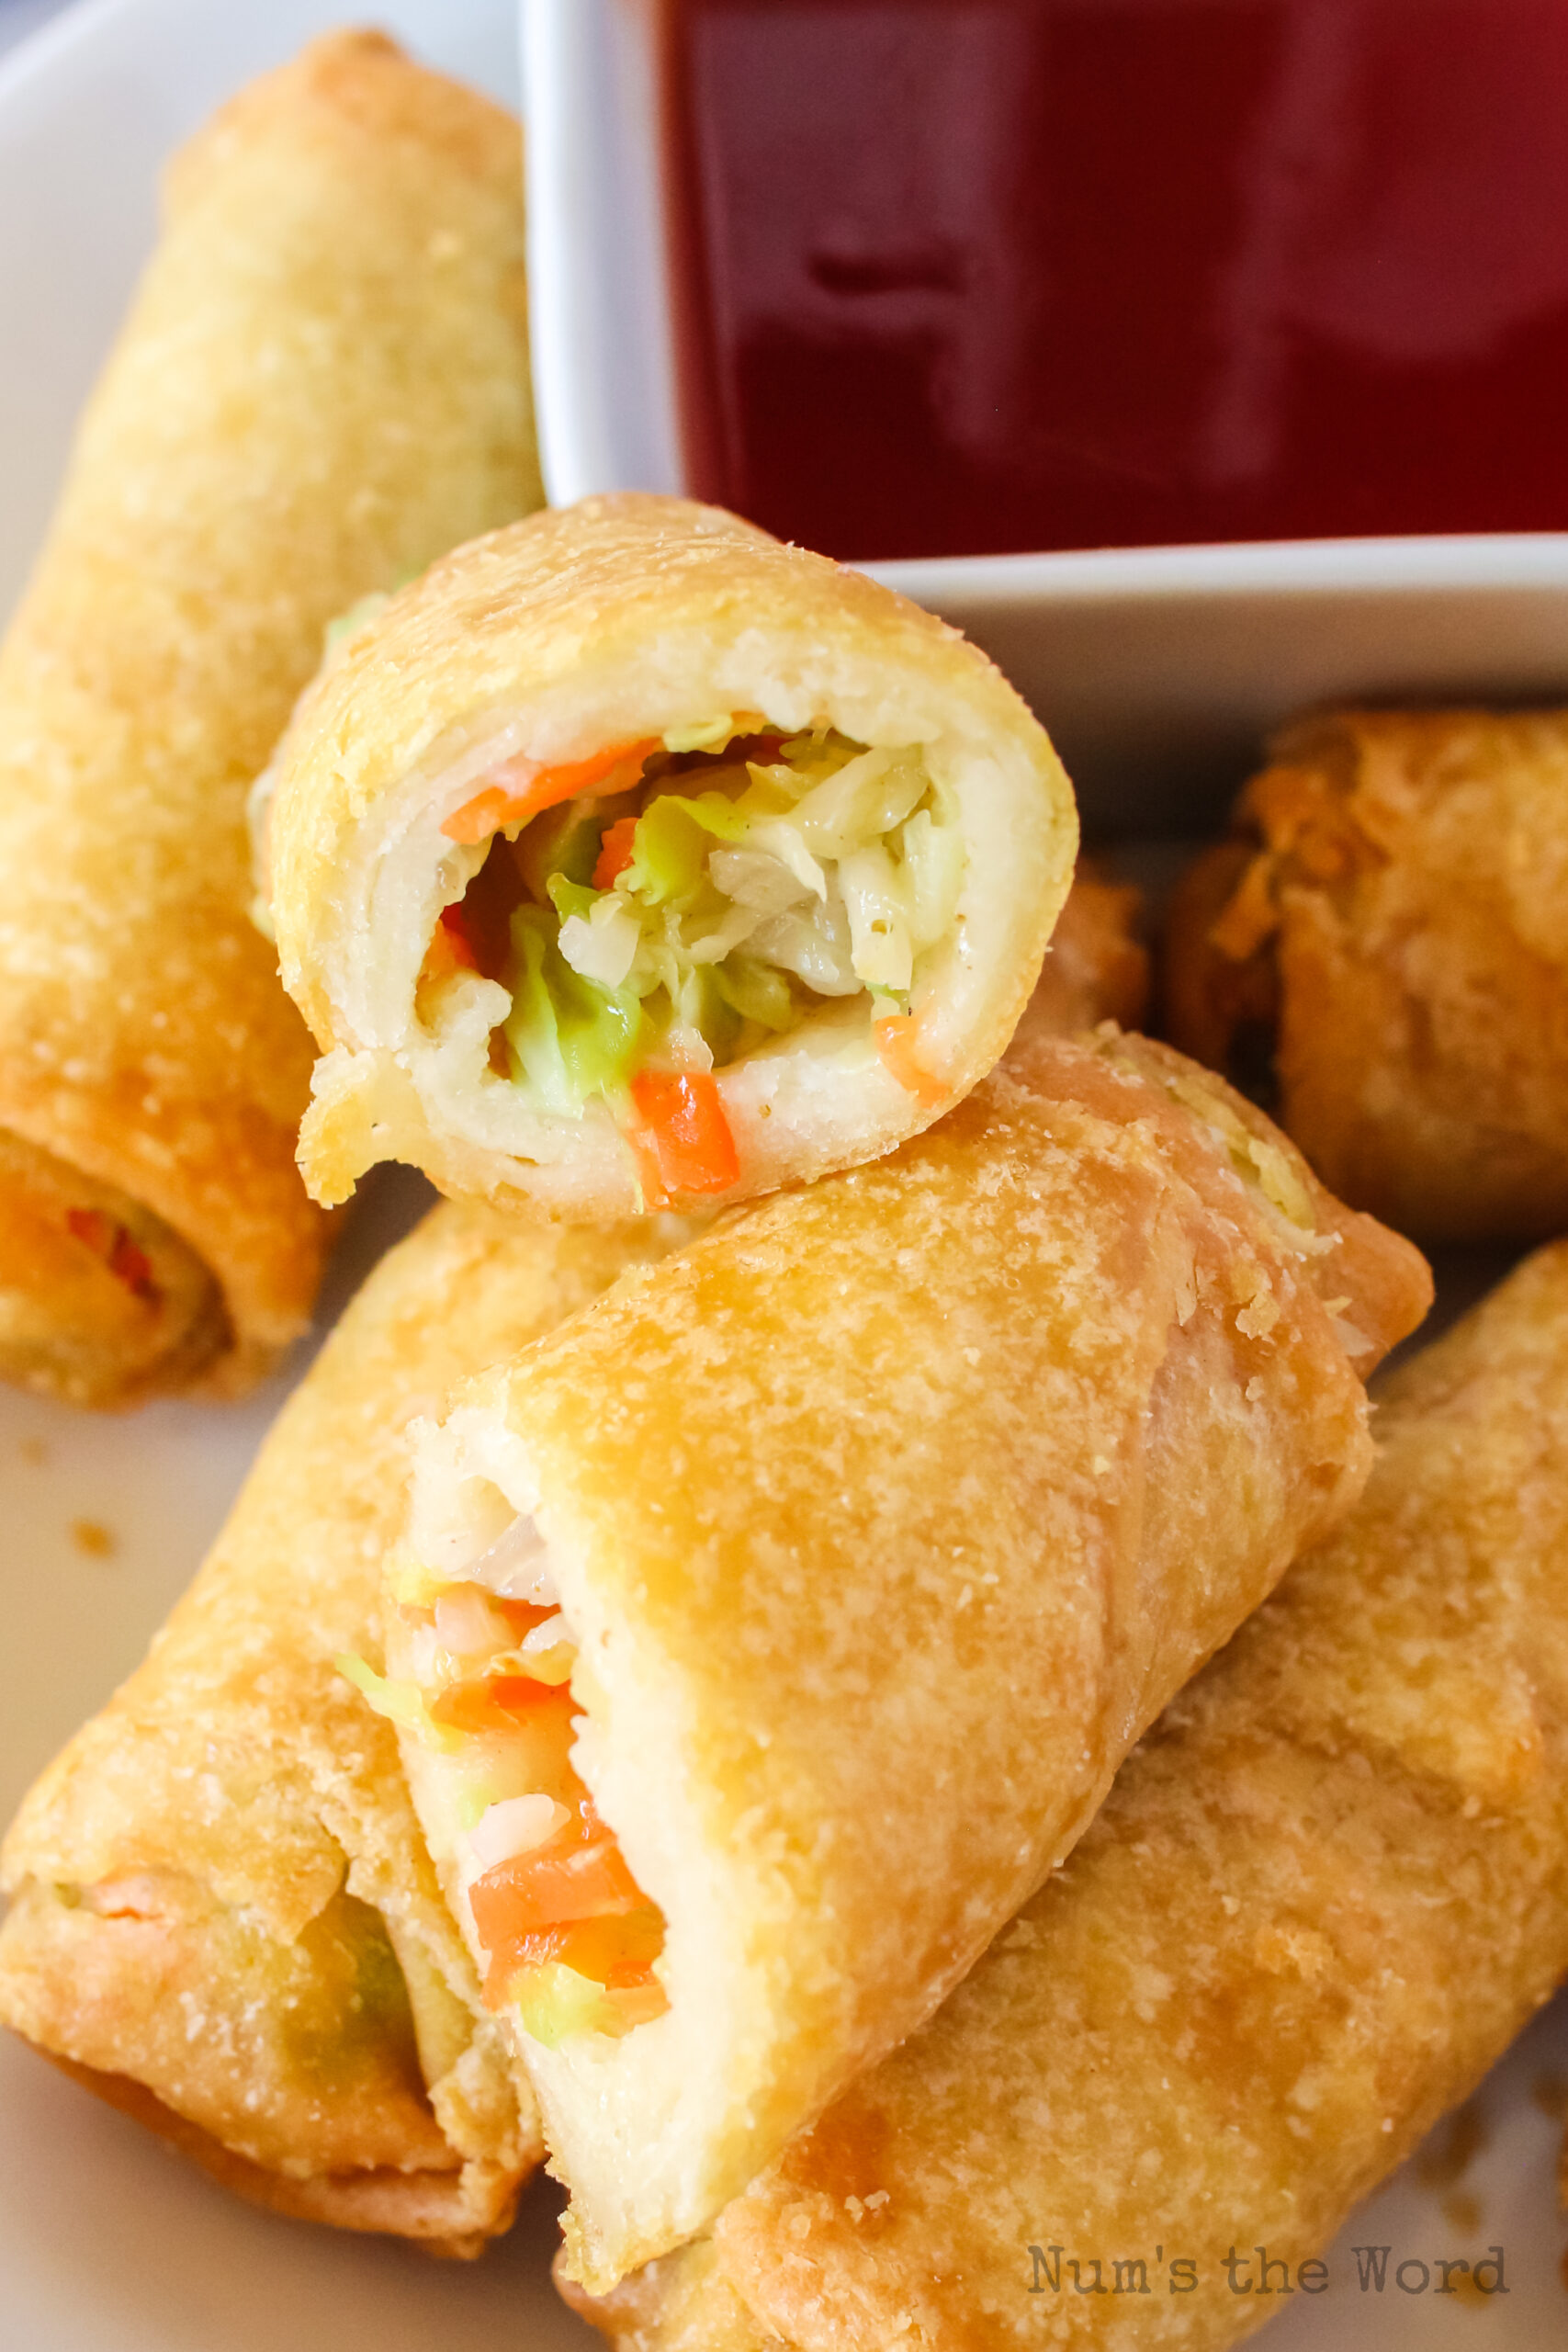 zoomed in image of egg rolls on plate with one cut in half.